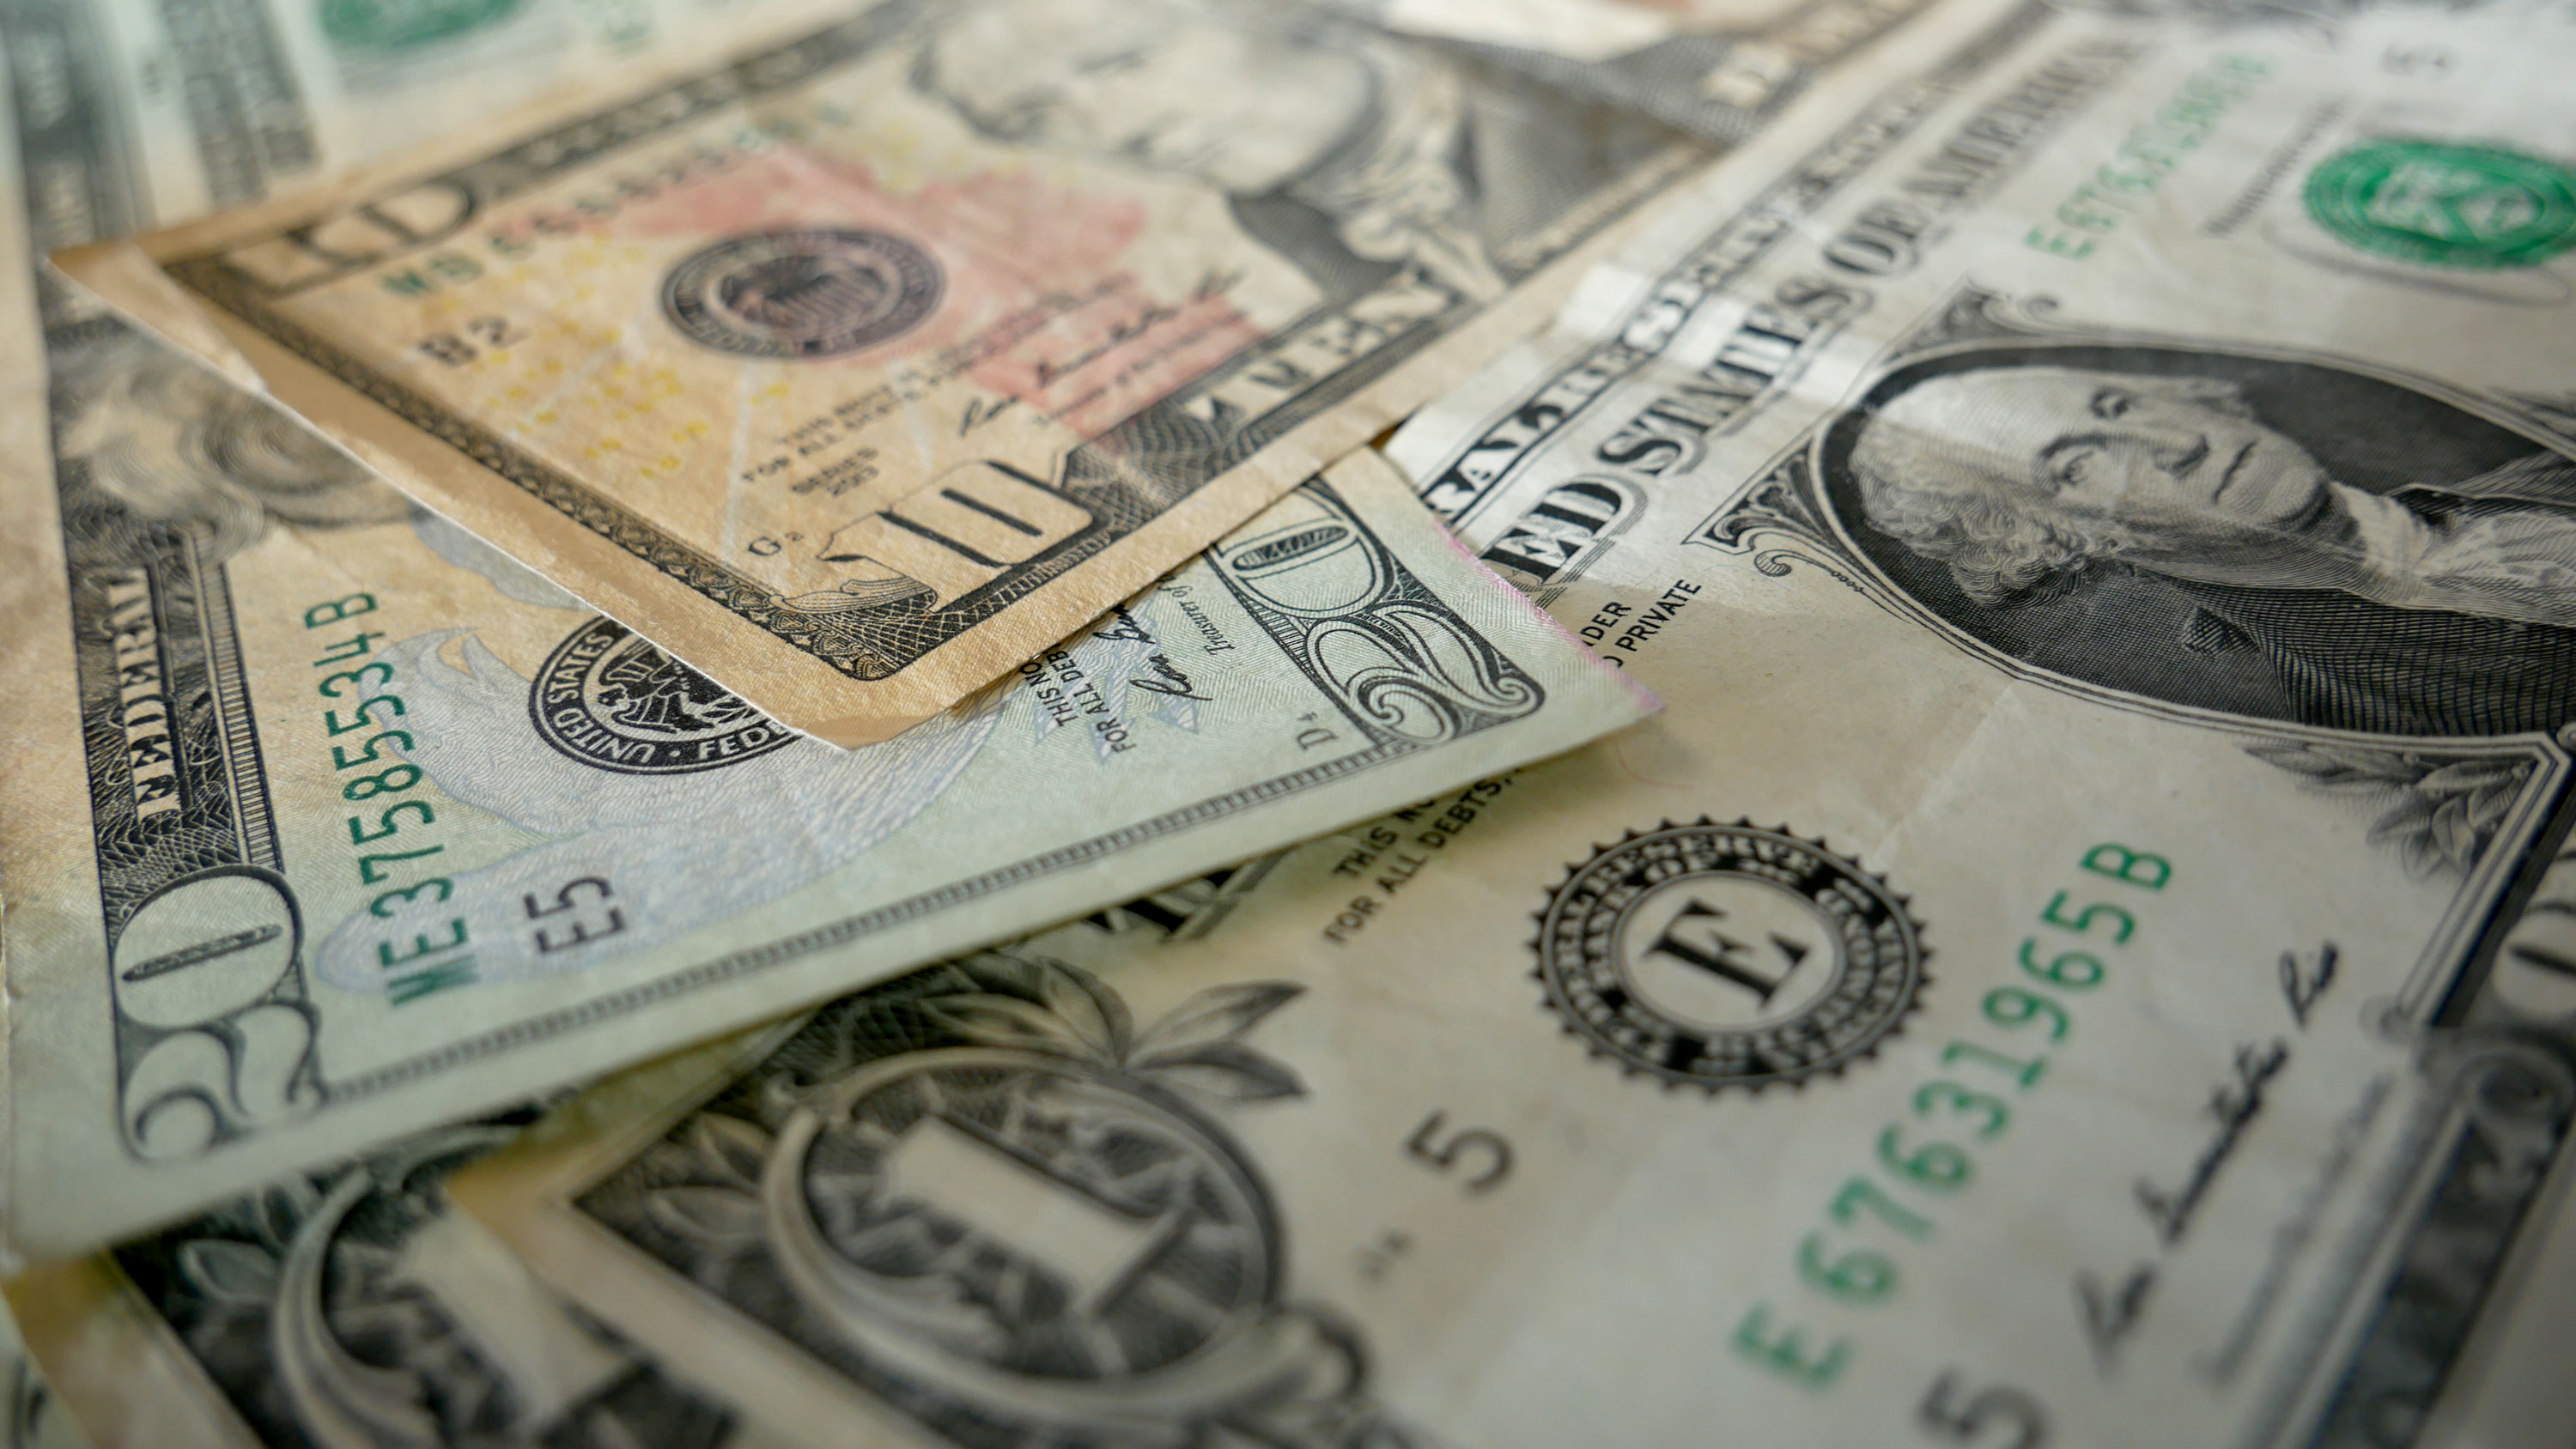 Closeup of American currency including $20, $10 and $1 bills